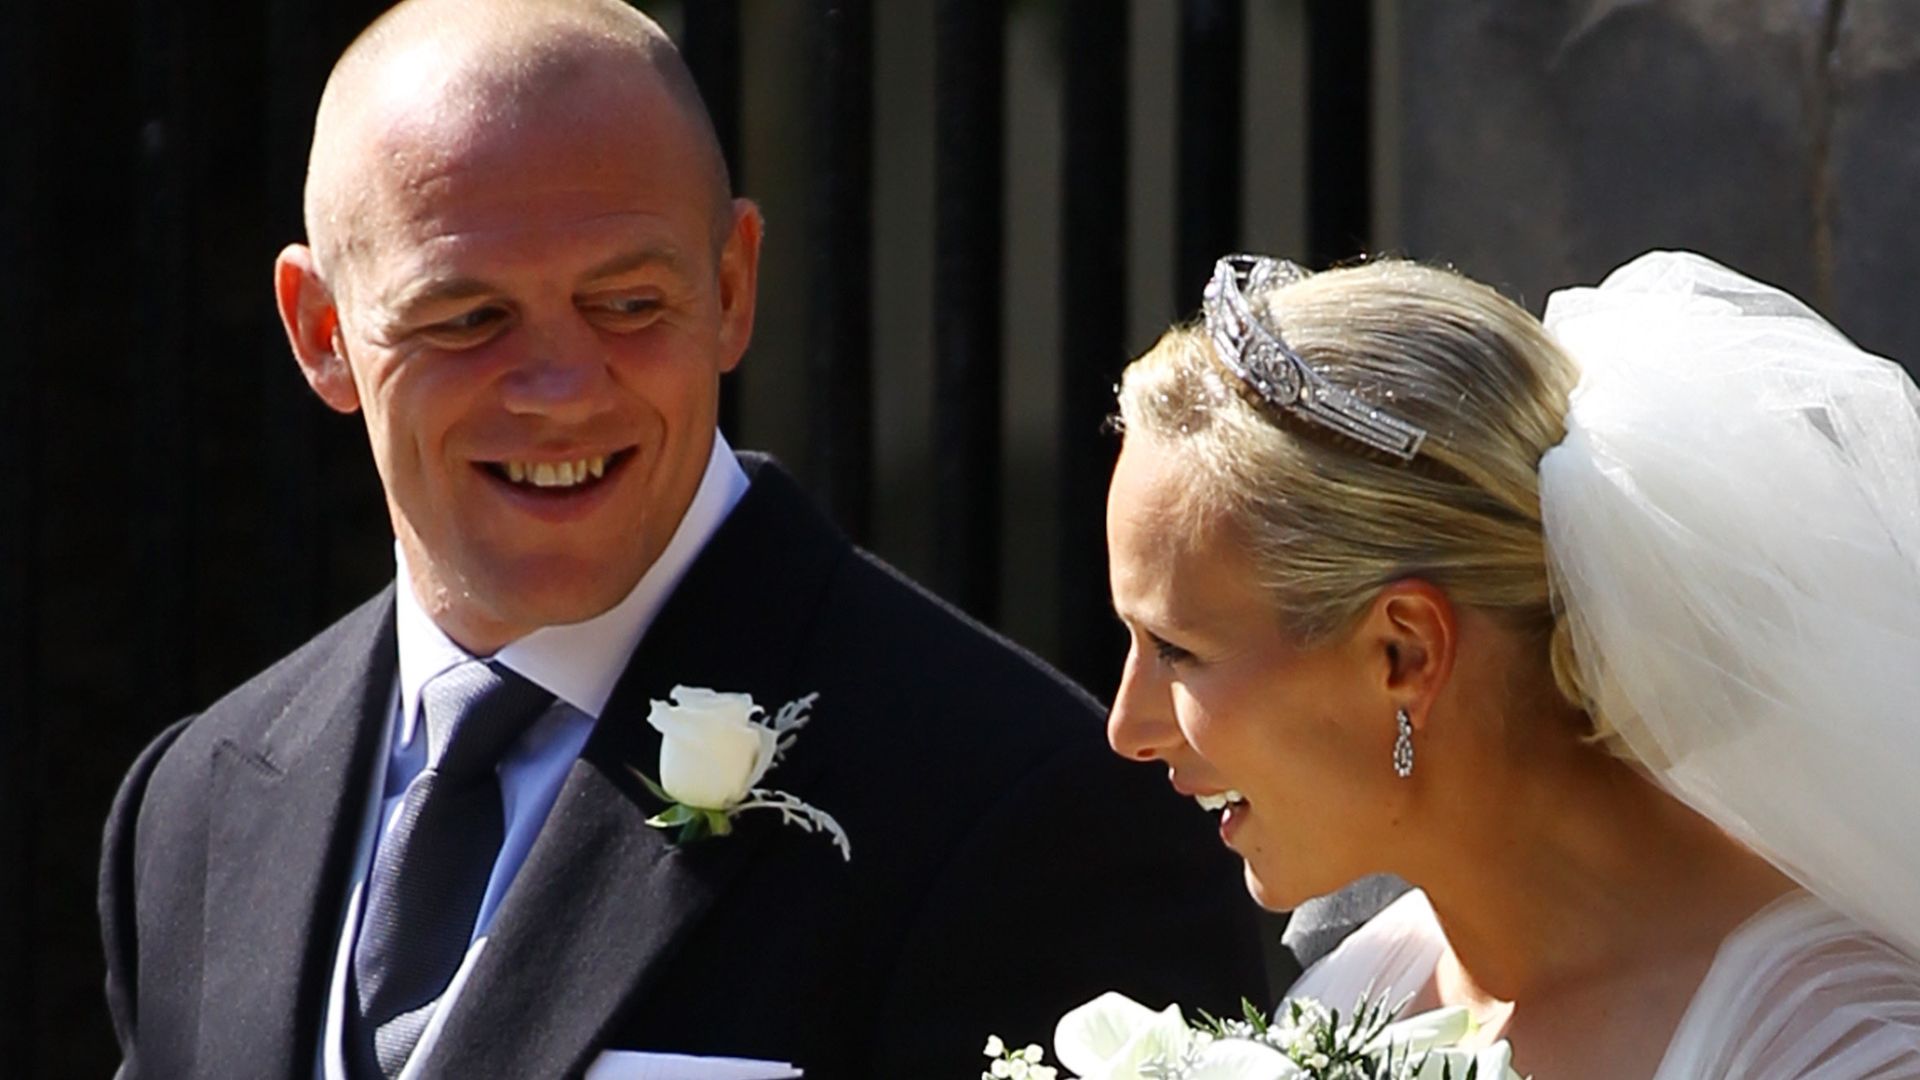 Mike Tindall looking at his wife Zara Phillips on their wedding day